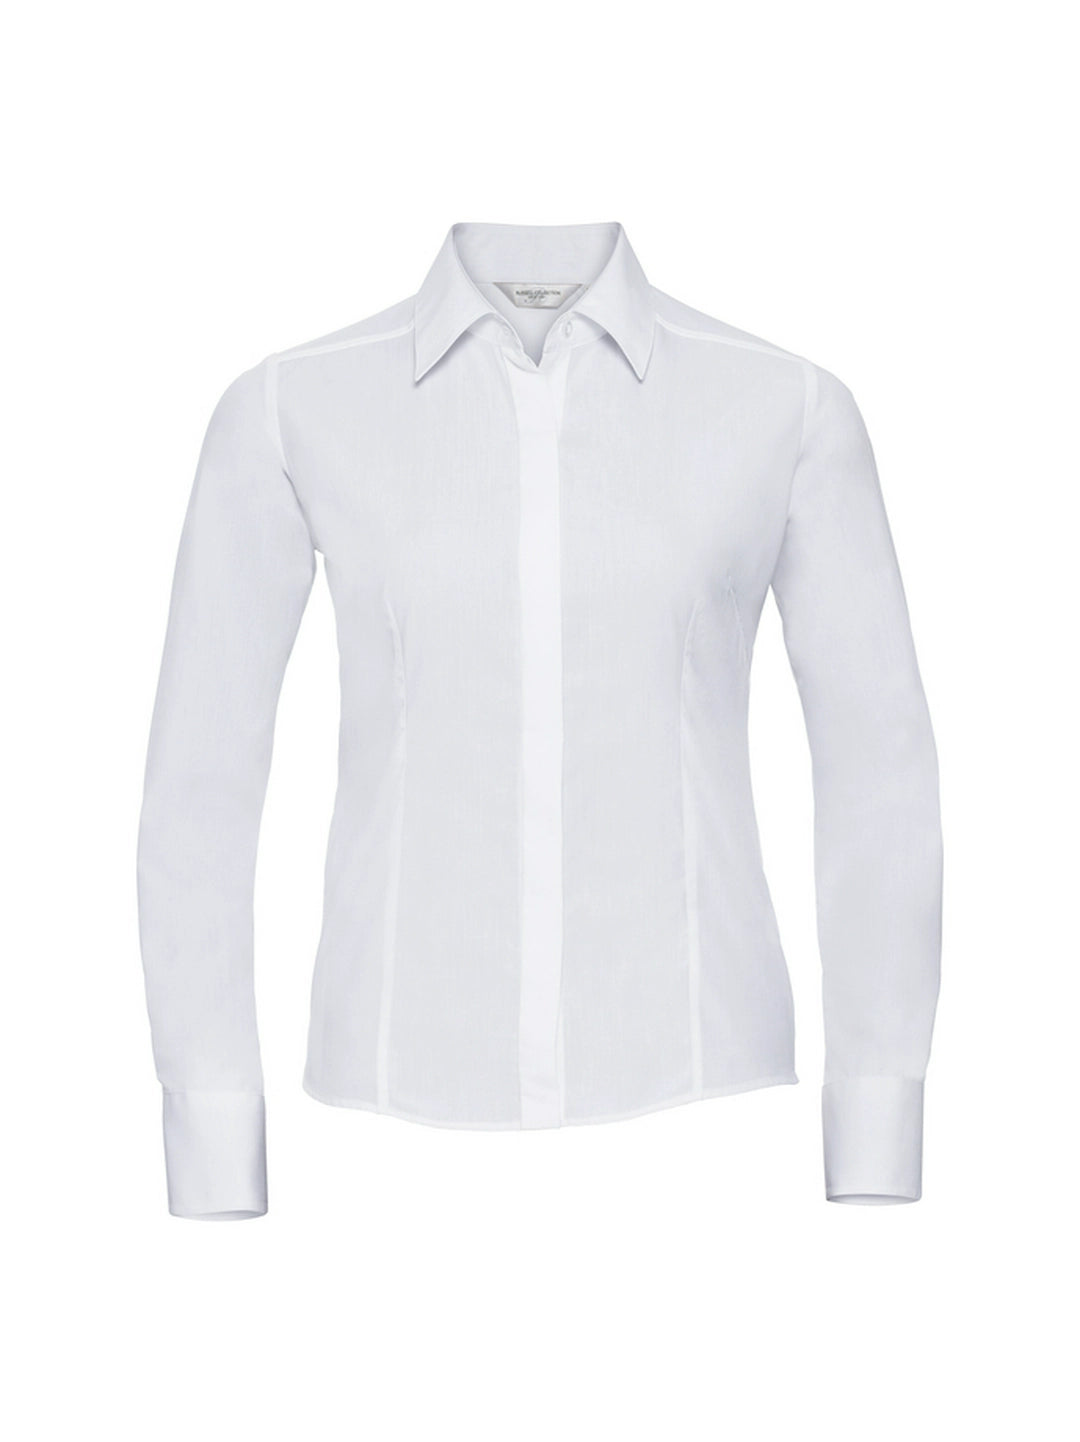 Russell Collection 924F Ladies Long Sleeve Fitted Polycotton Poplin Shirt - COOZO